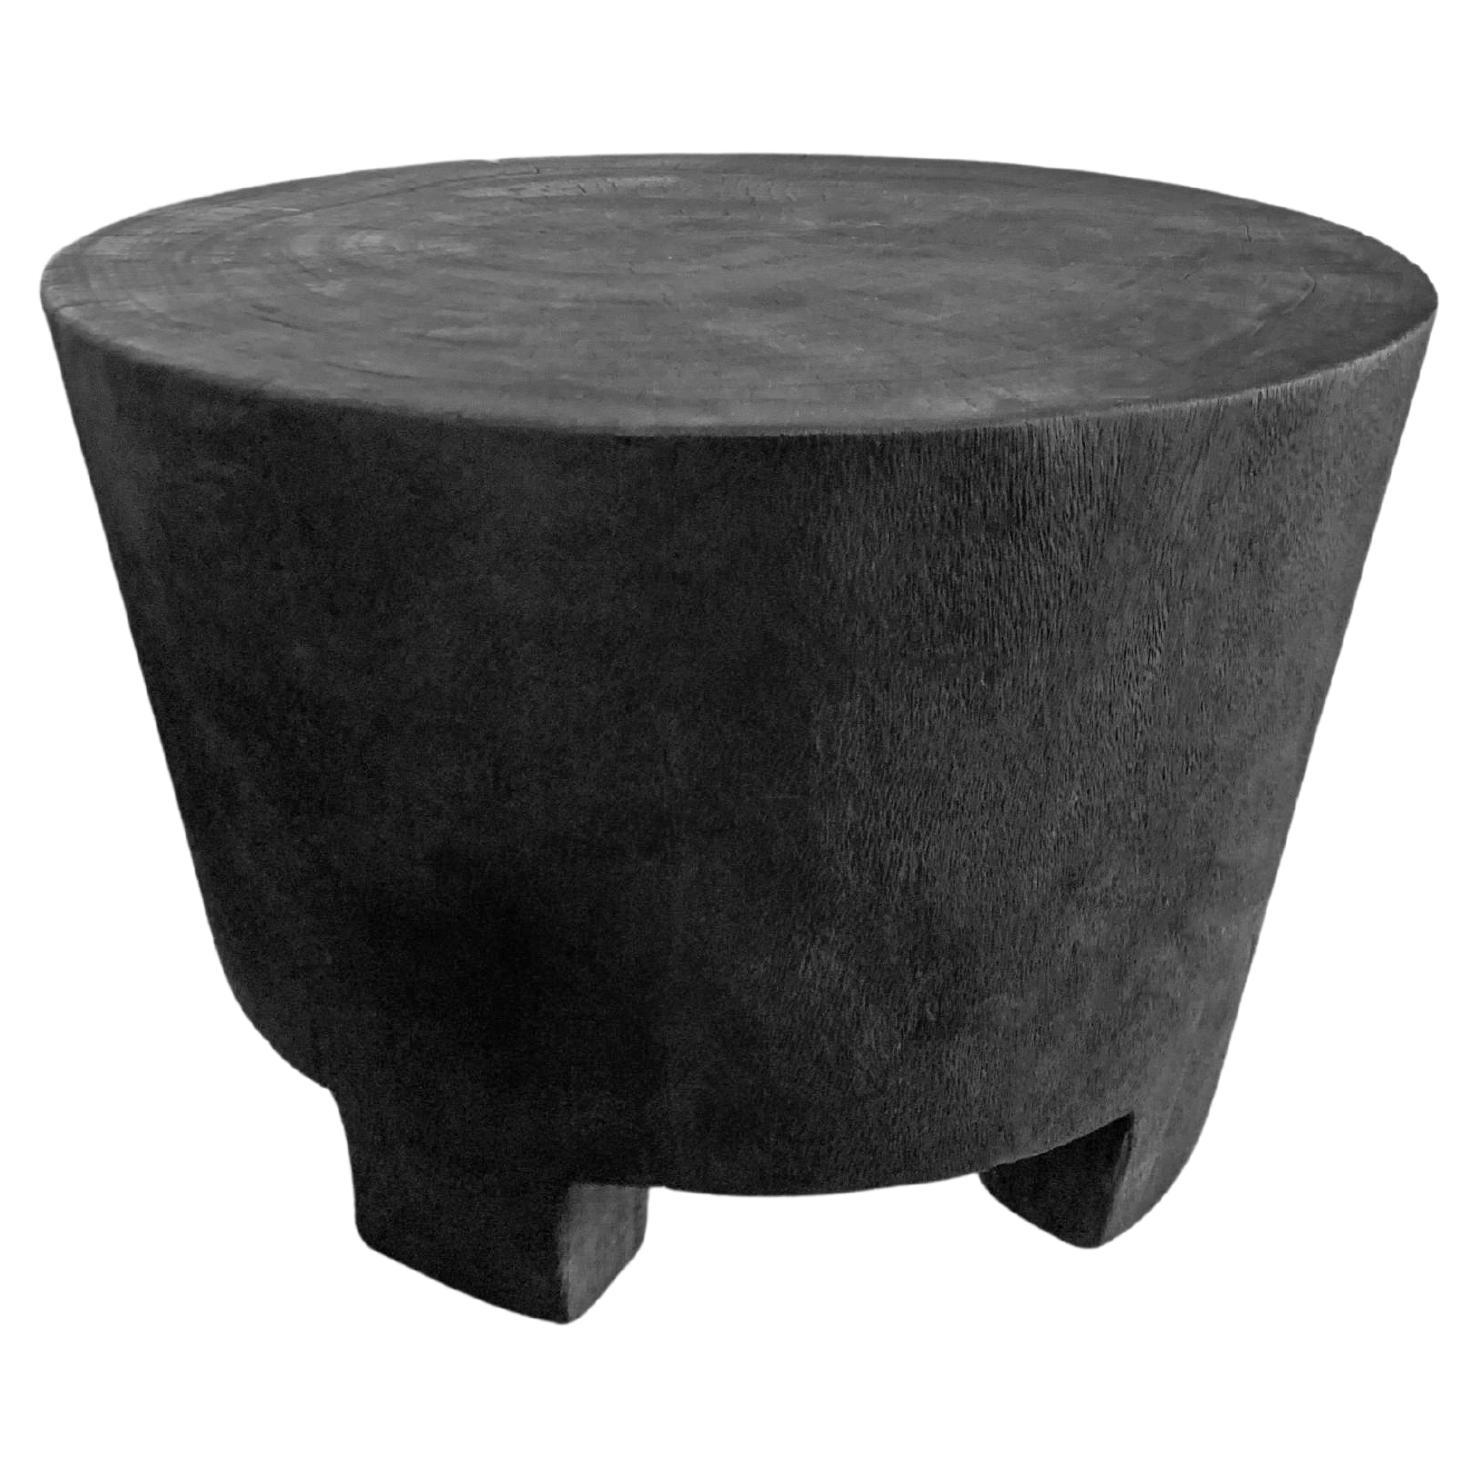 Solid Mango Wood Side Table with Burnt Finish, Modern Organic For Sale